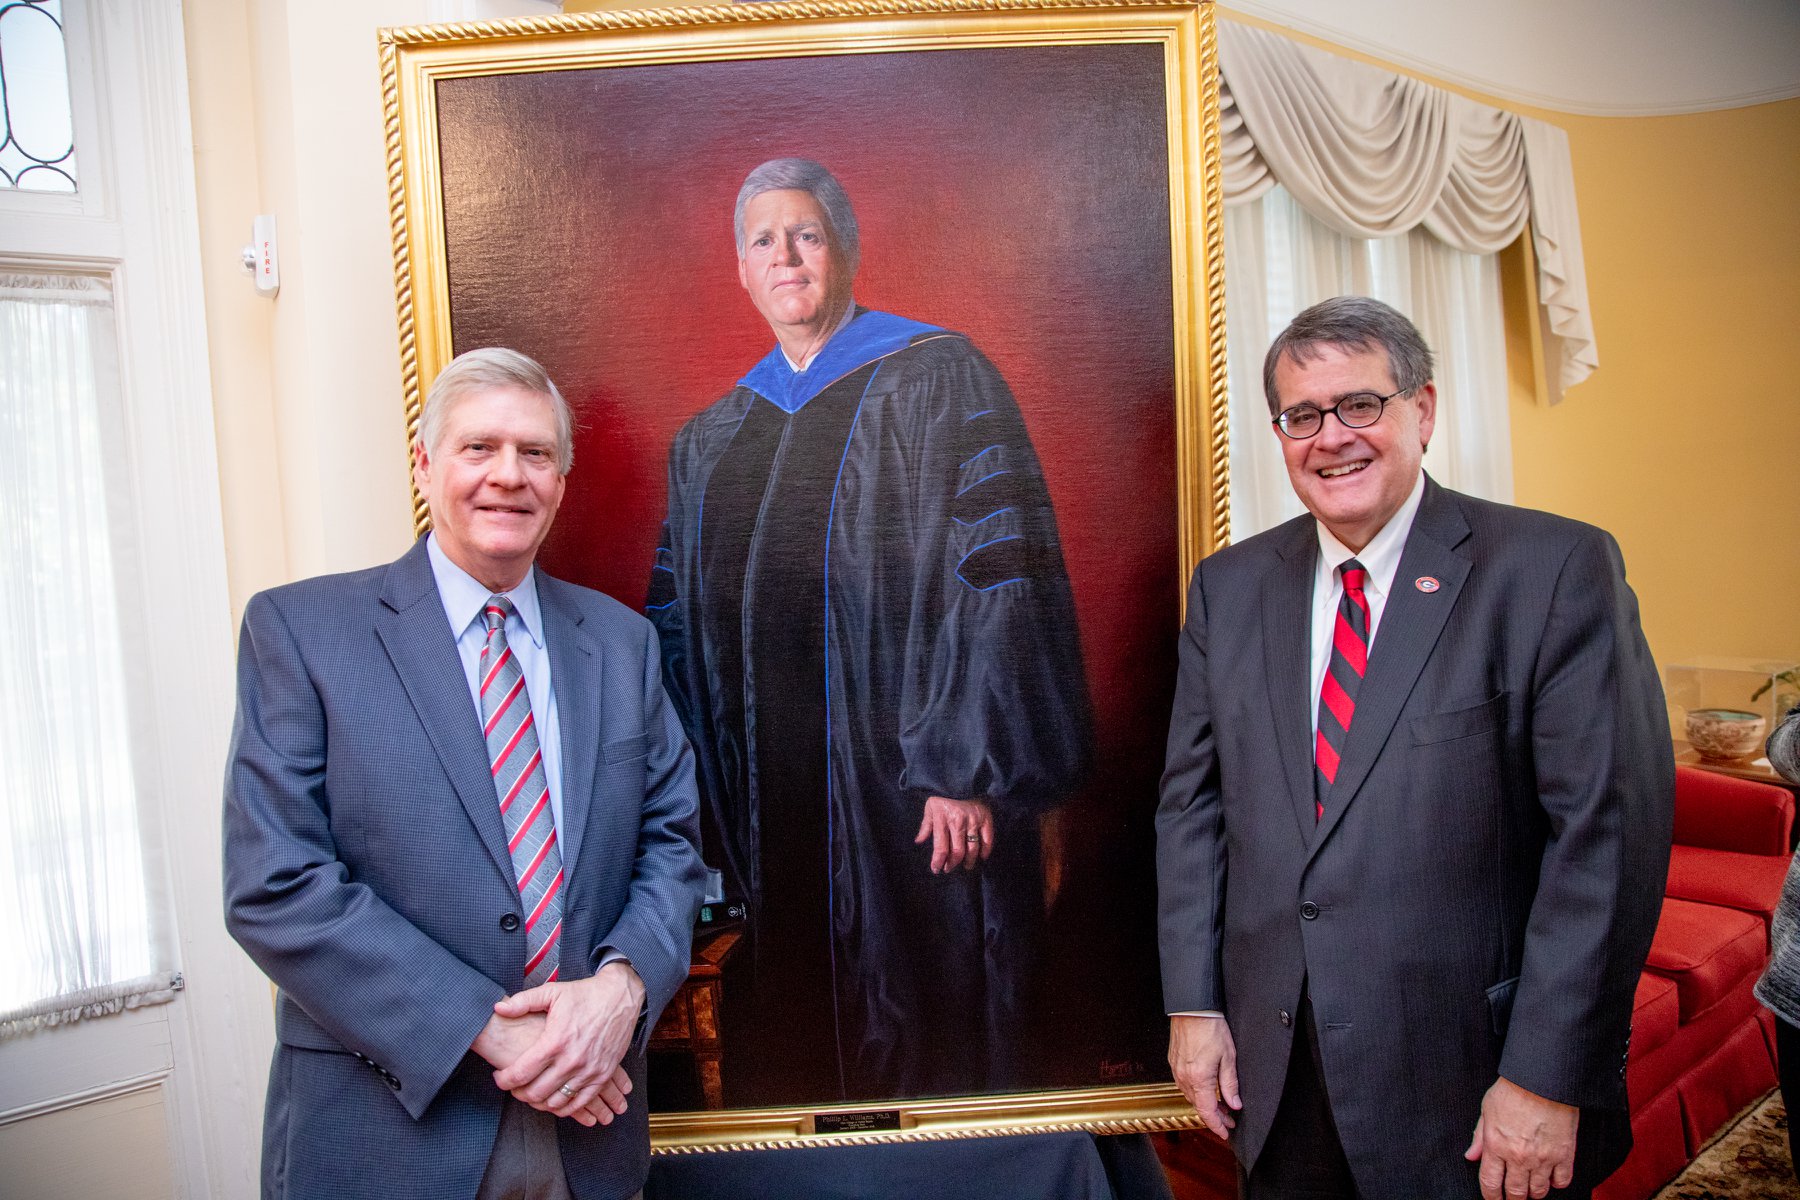 College celebrates legacy of founding dean